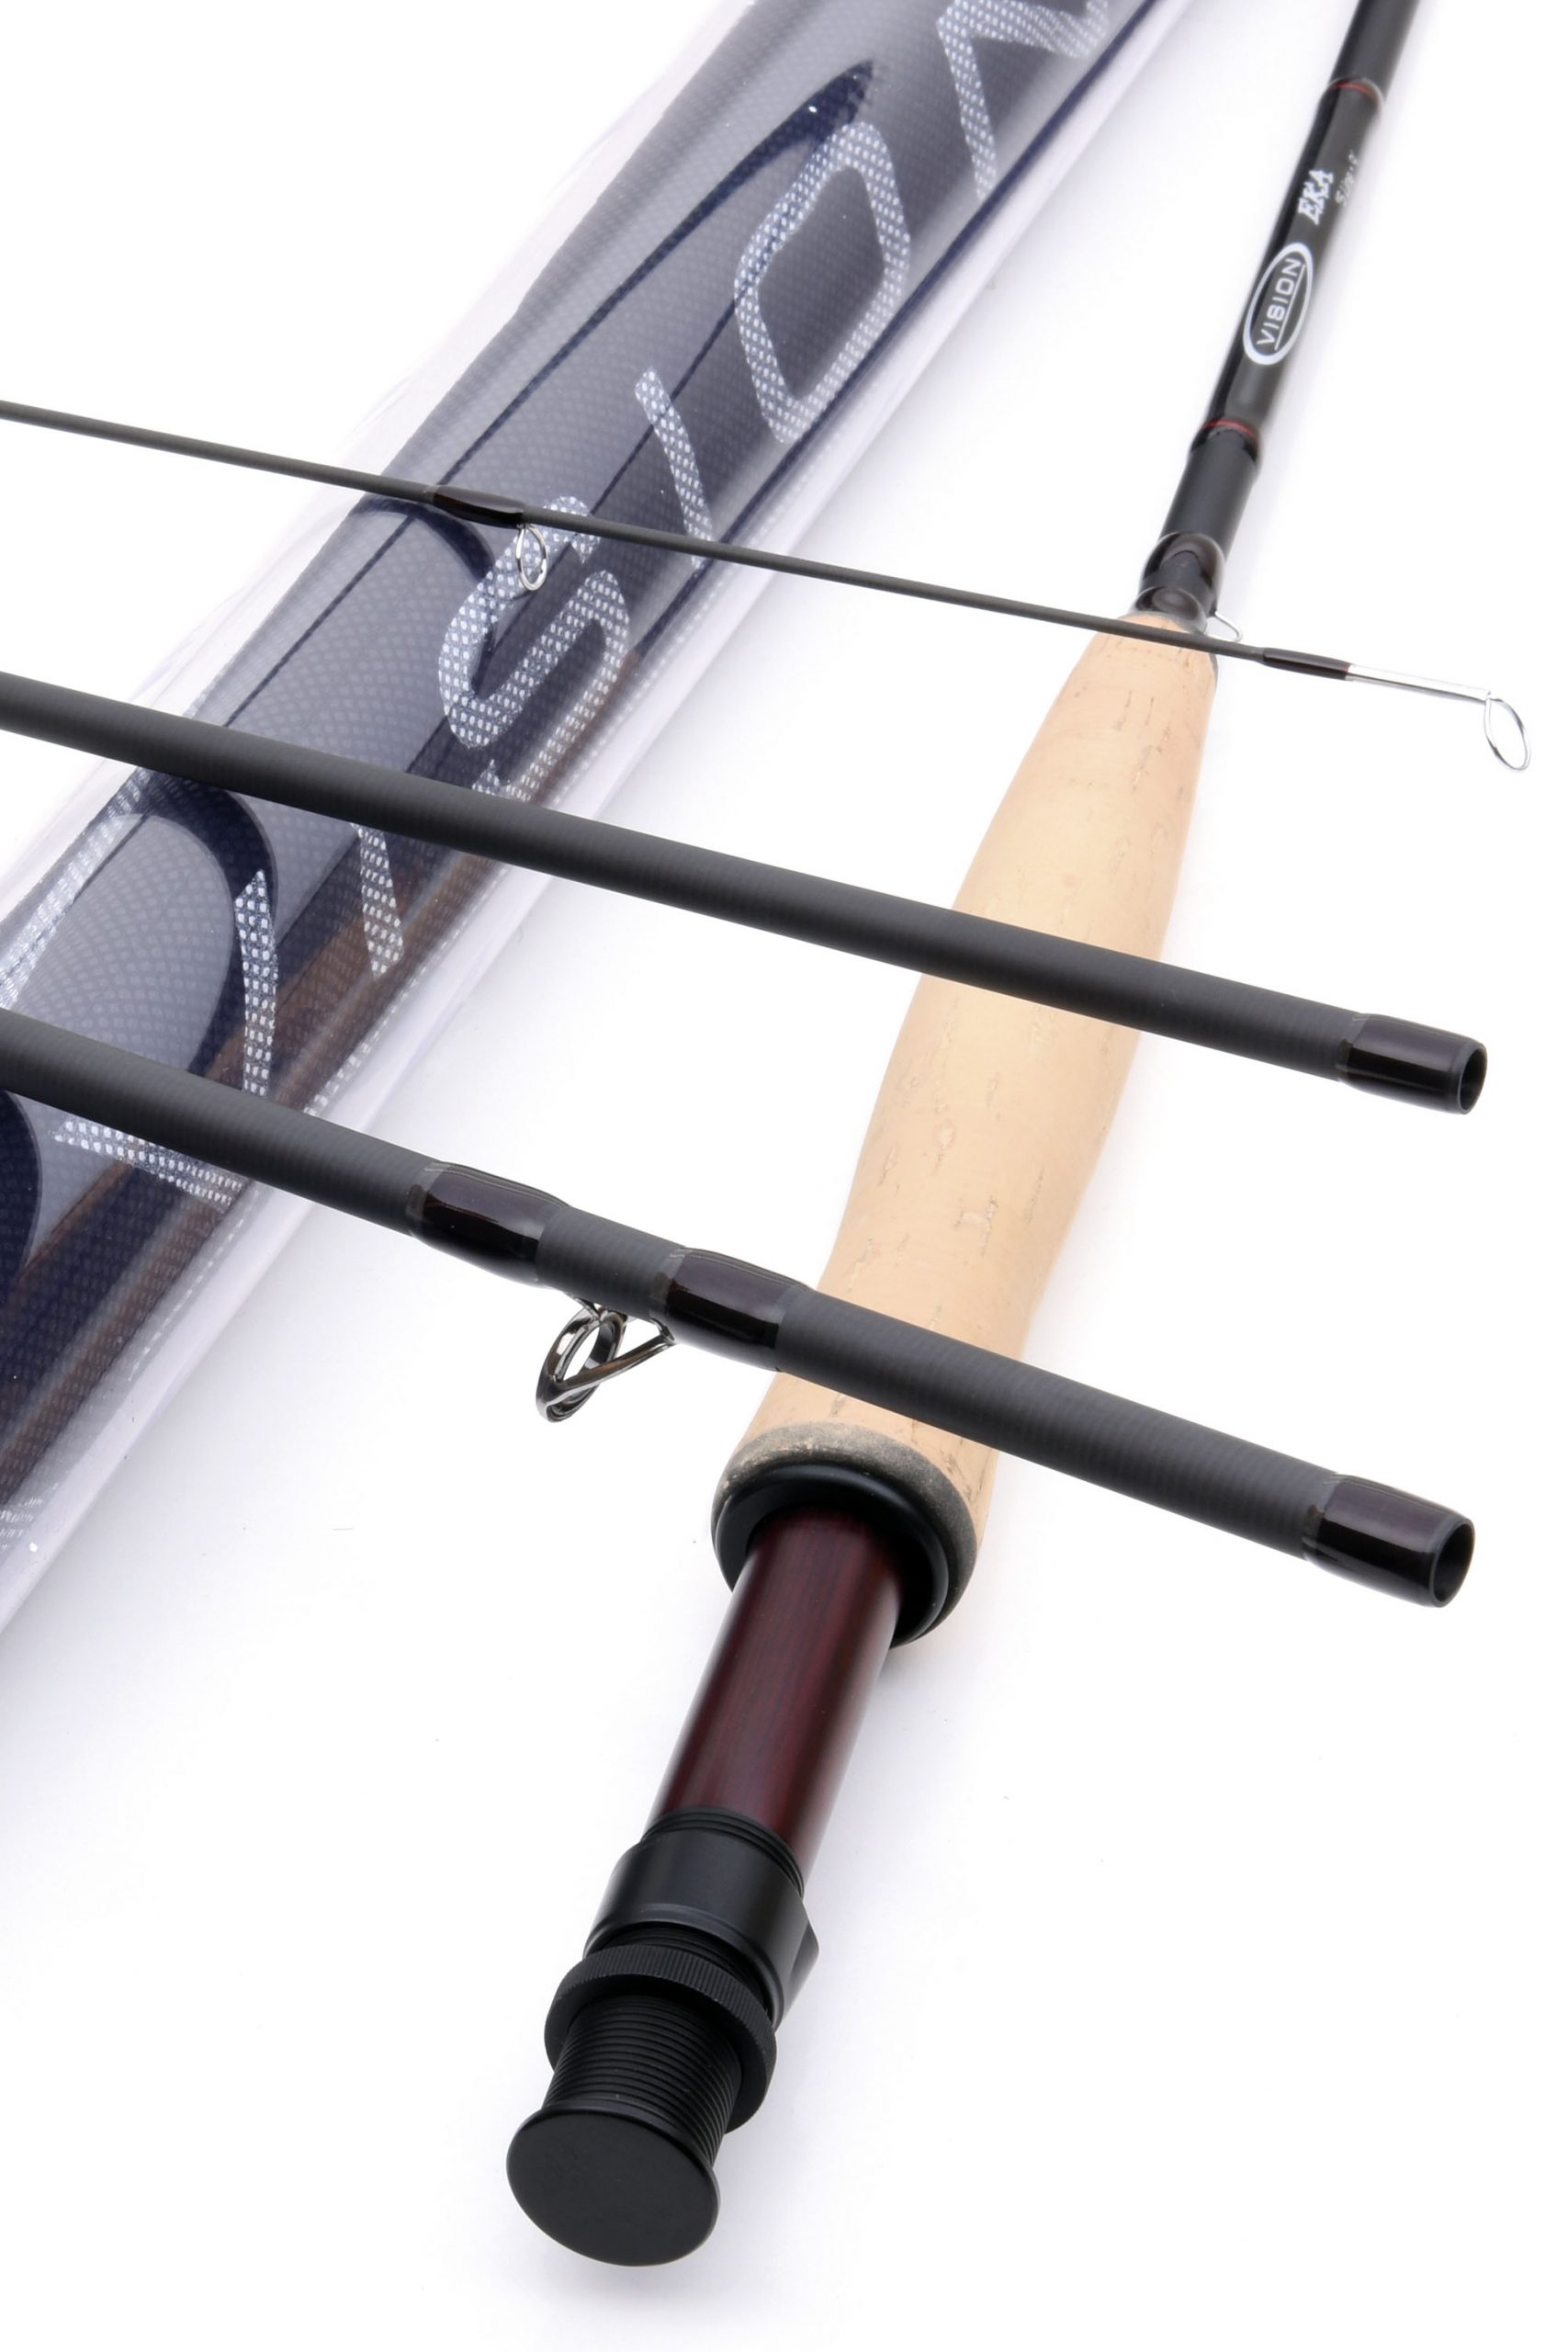 Vision Eka Fly Rod 9 Foot #5 For Fly Fishing (Length 9ft / 2.75m)